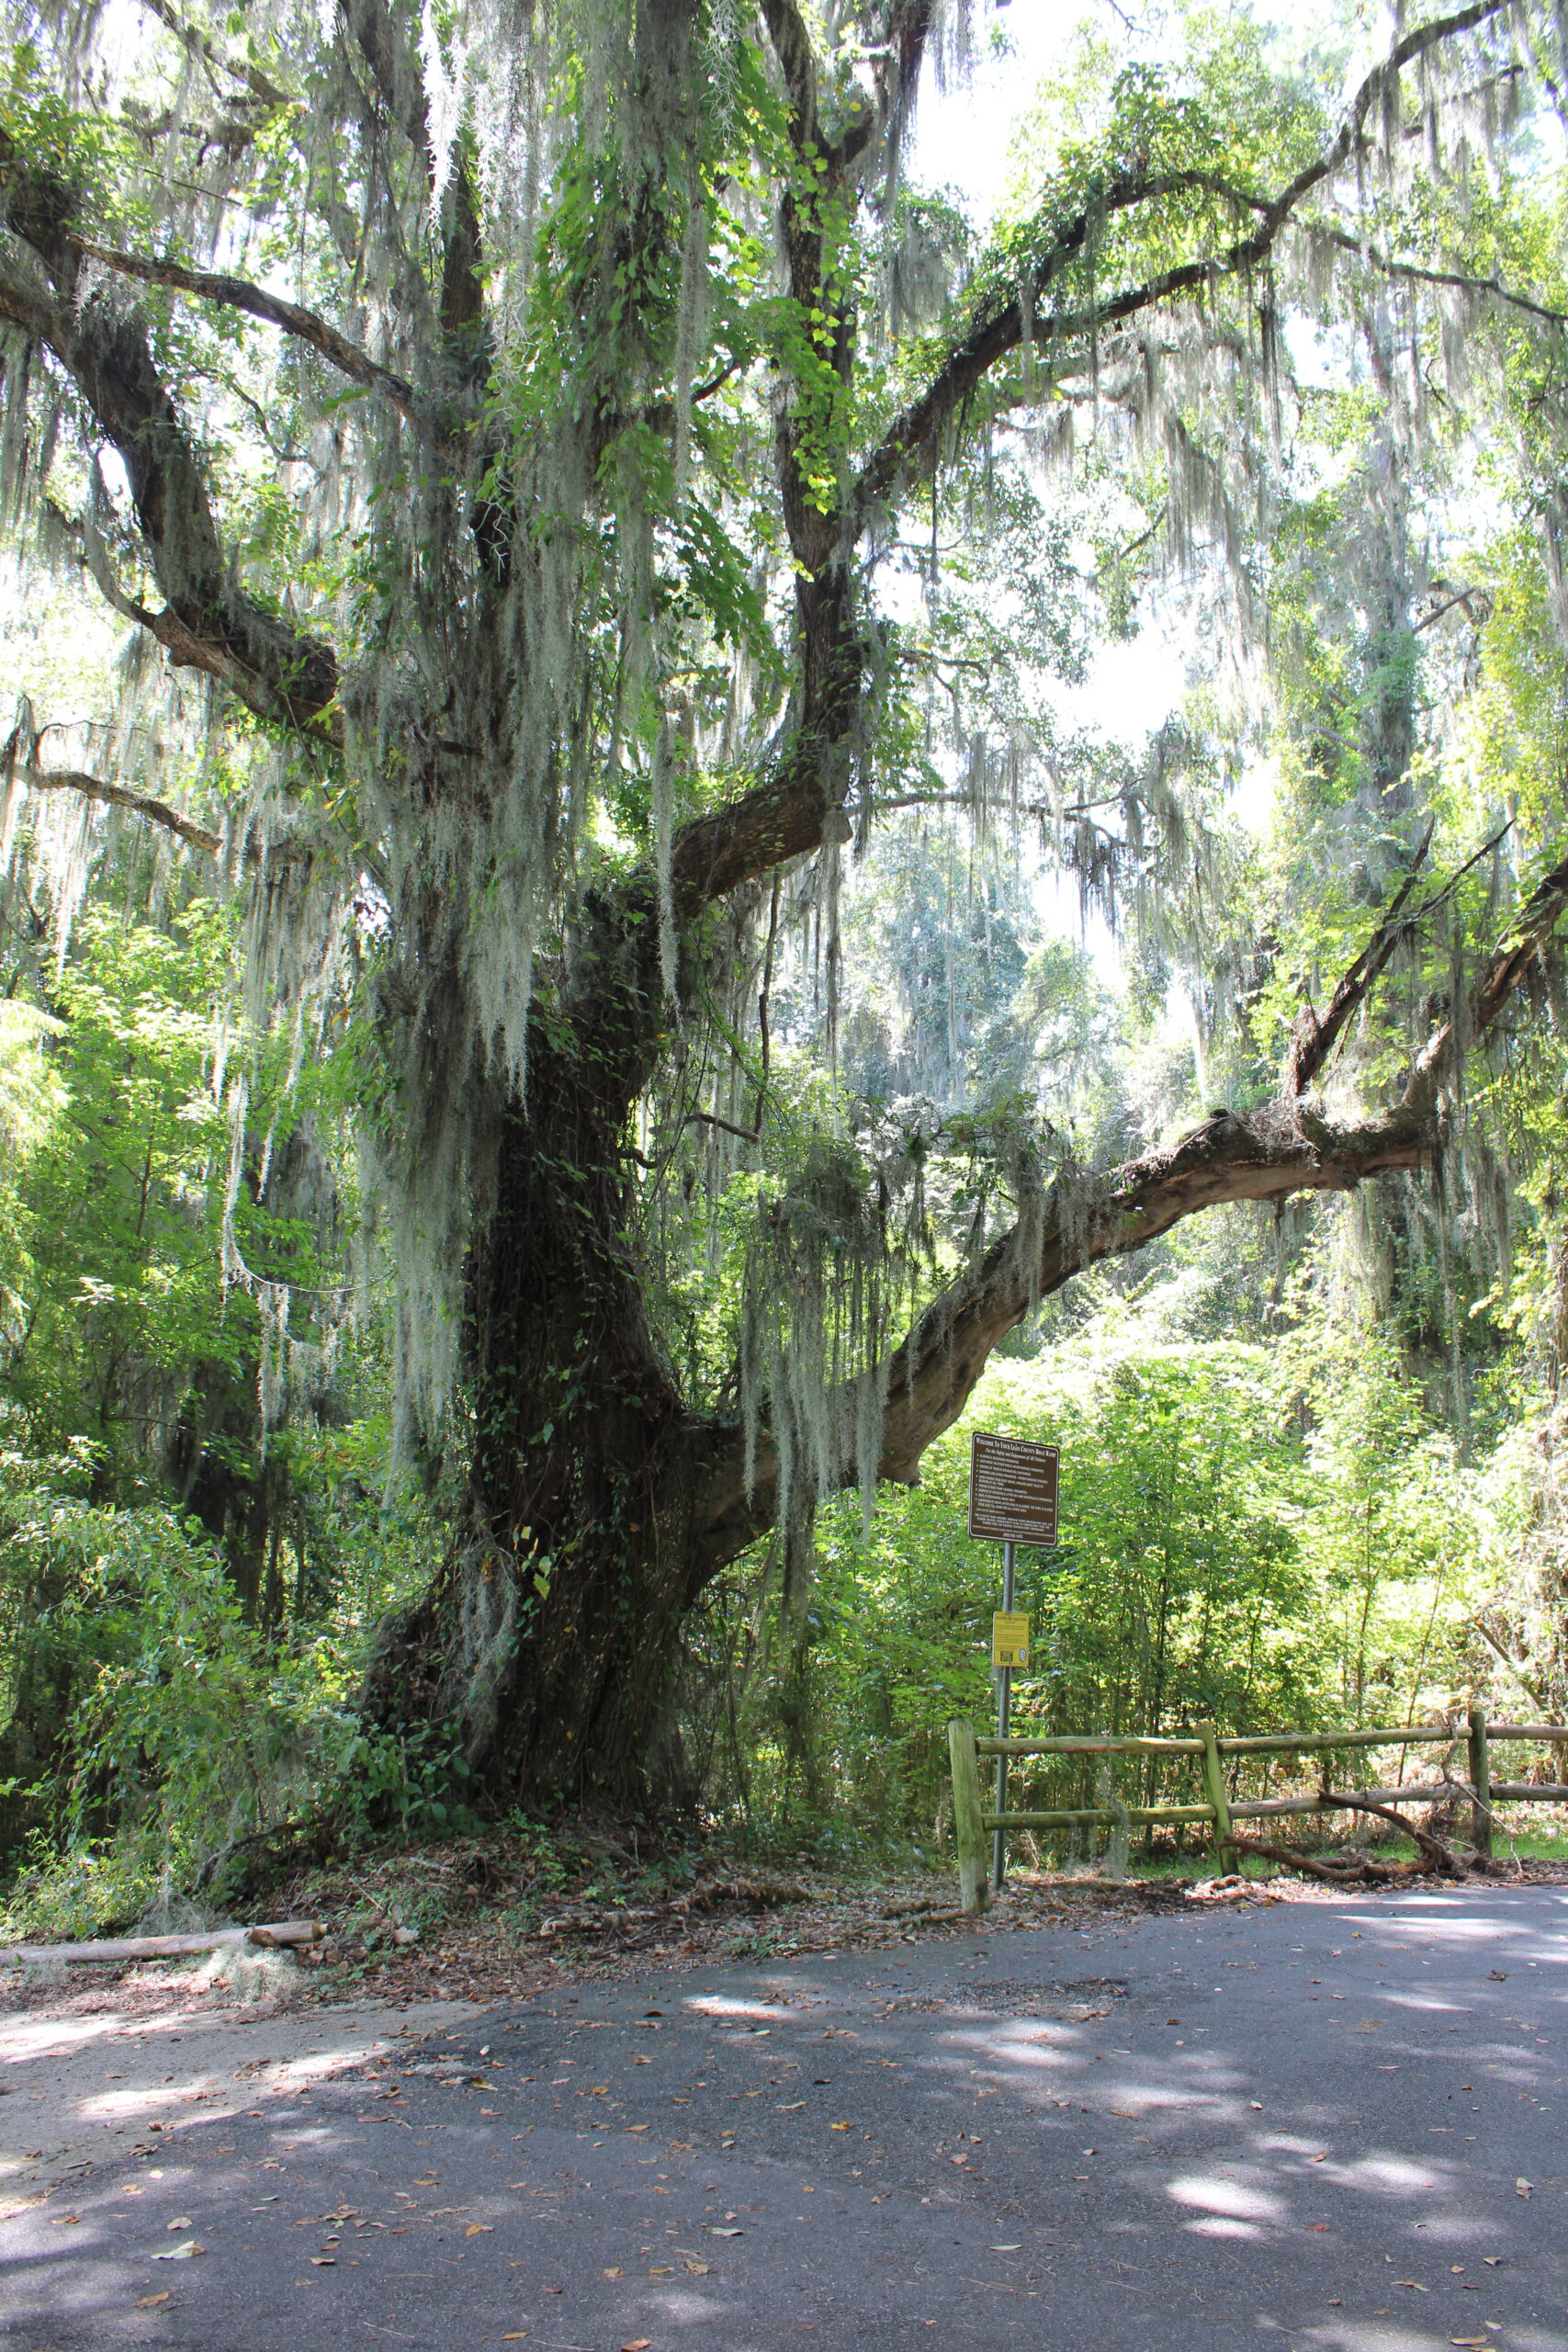 Photo is decorative and taken by a Tallahassee Realtor. Photo shows a road and wooden fence under a sprawling oak